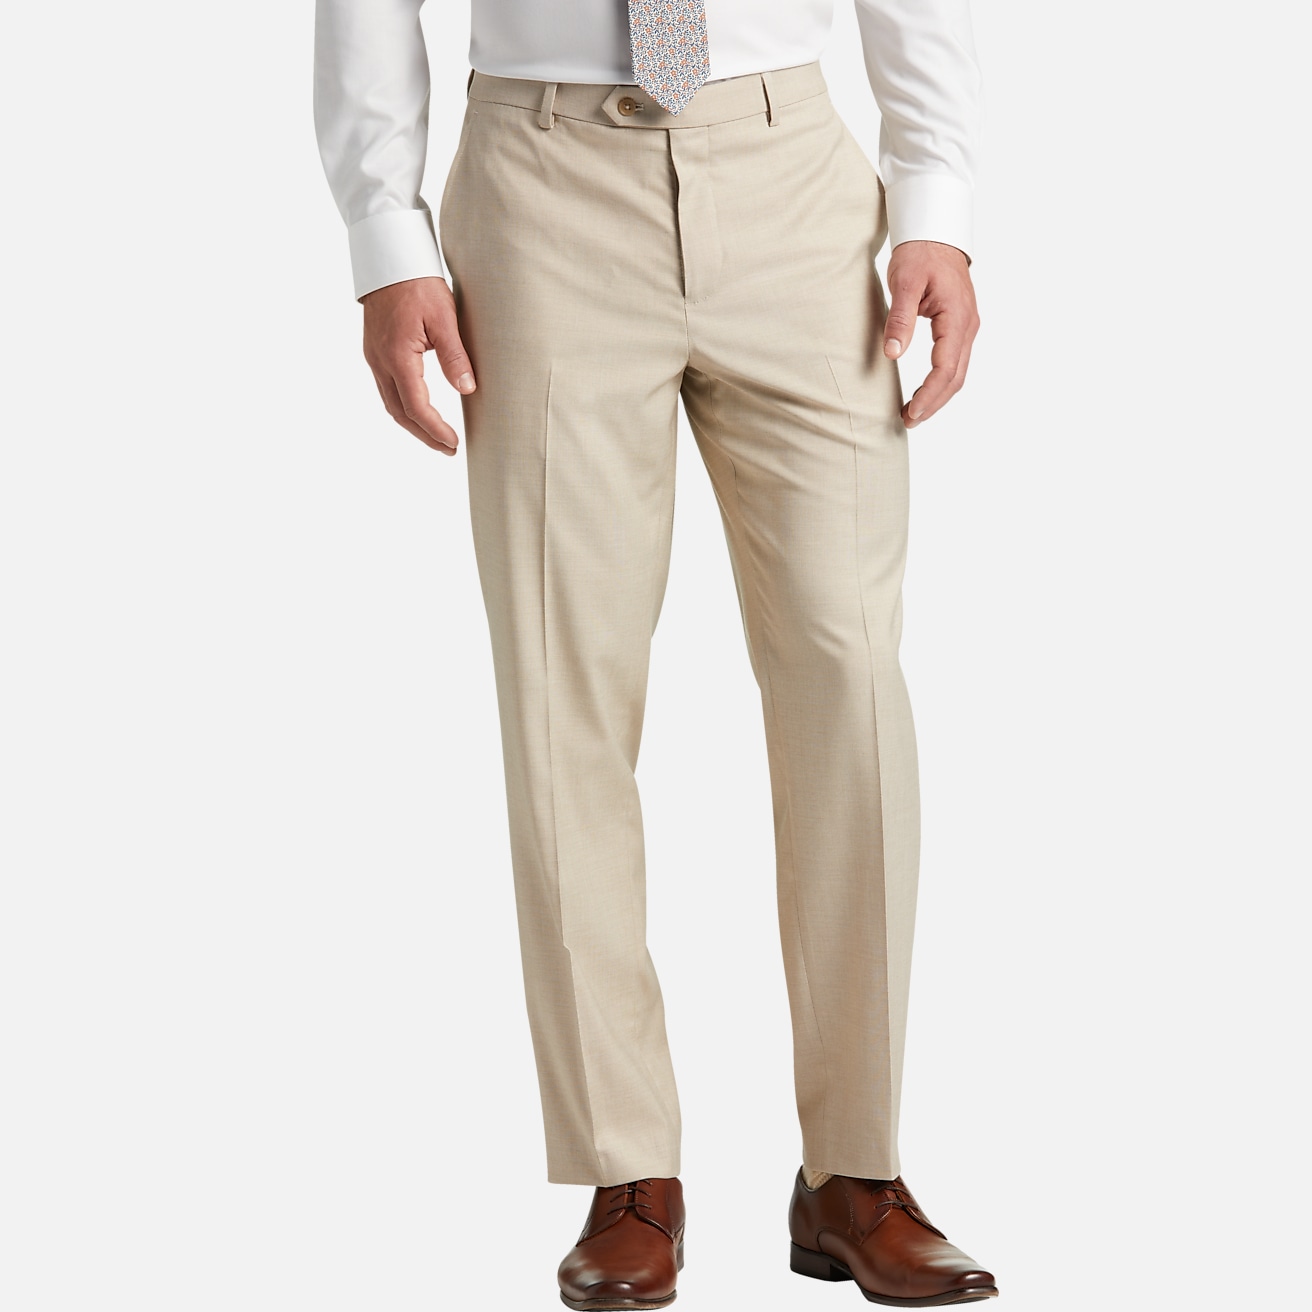 https://image.menswearhouse.com/is/image/TMW/TMW_3XPH_05_PRONTO_UOMO_SUIT_SEPARATE_PANTS_TAN_SHARKSKIN_MAIN?imPolicy=pdp-mob-2x